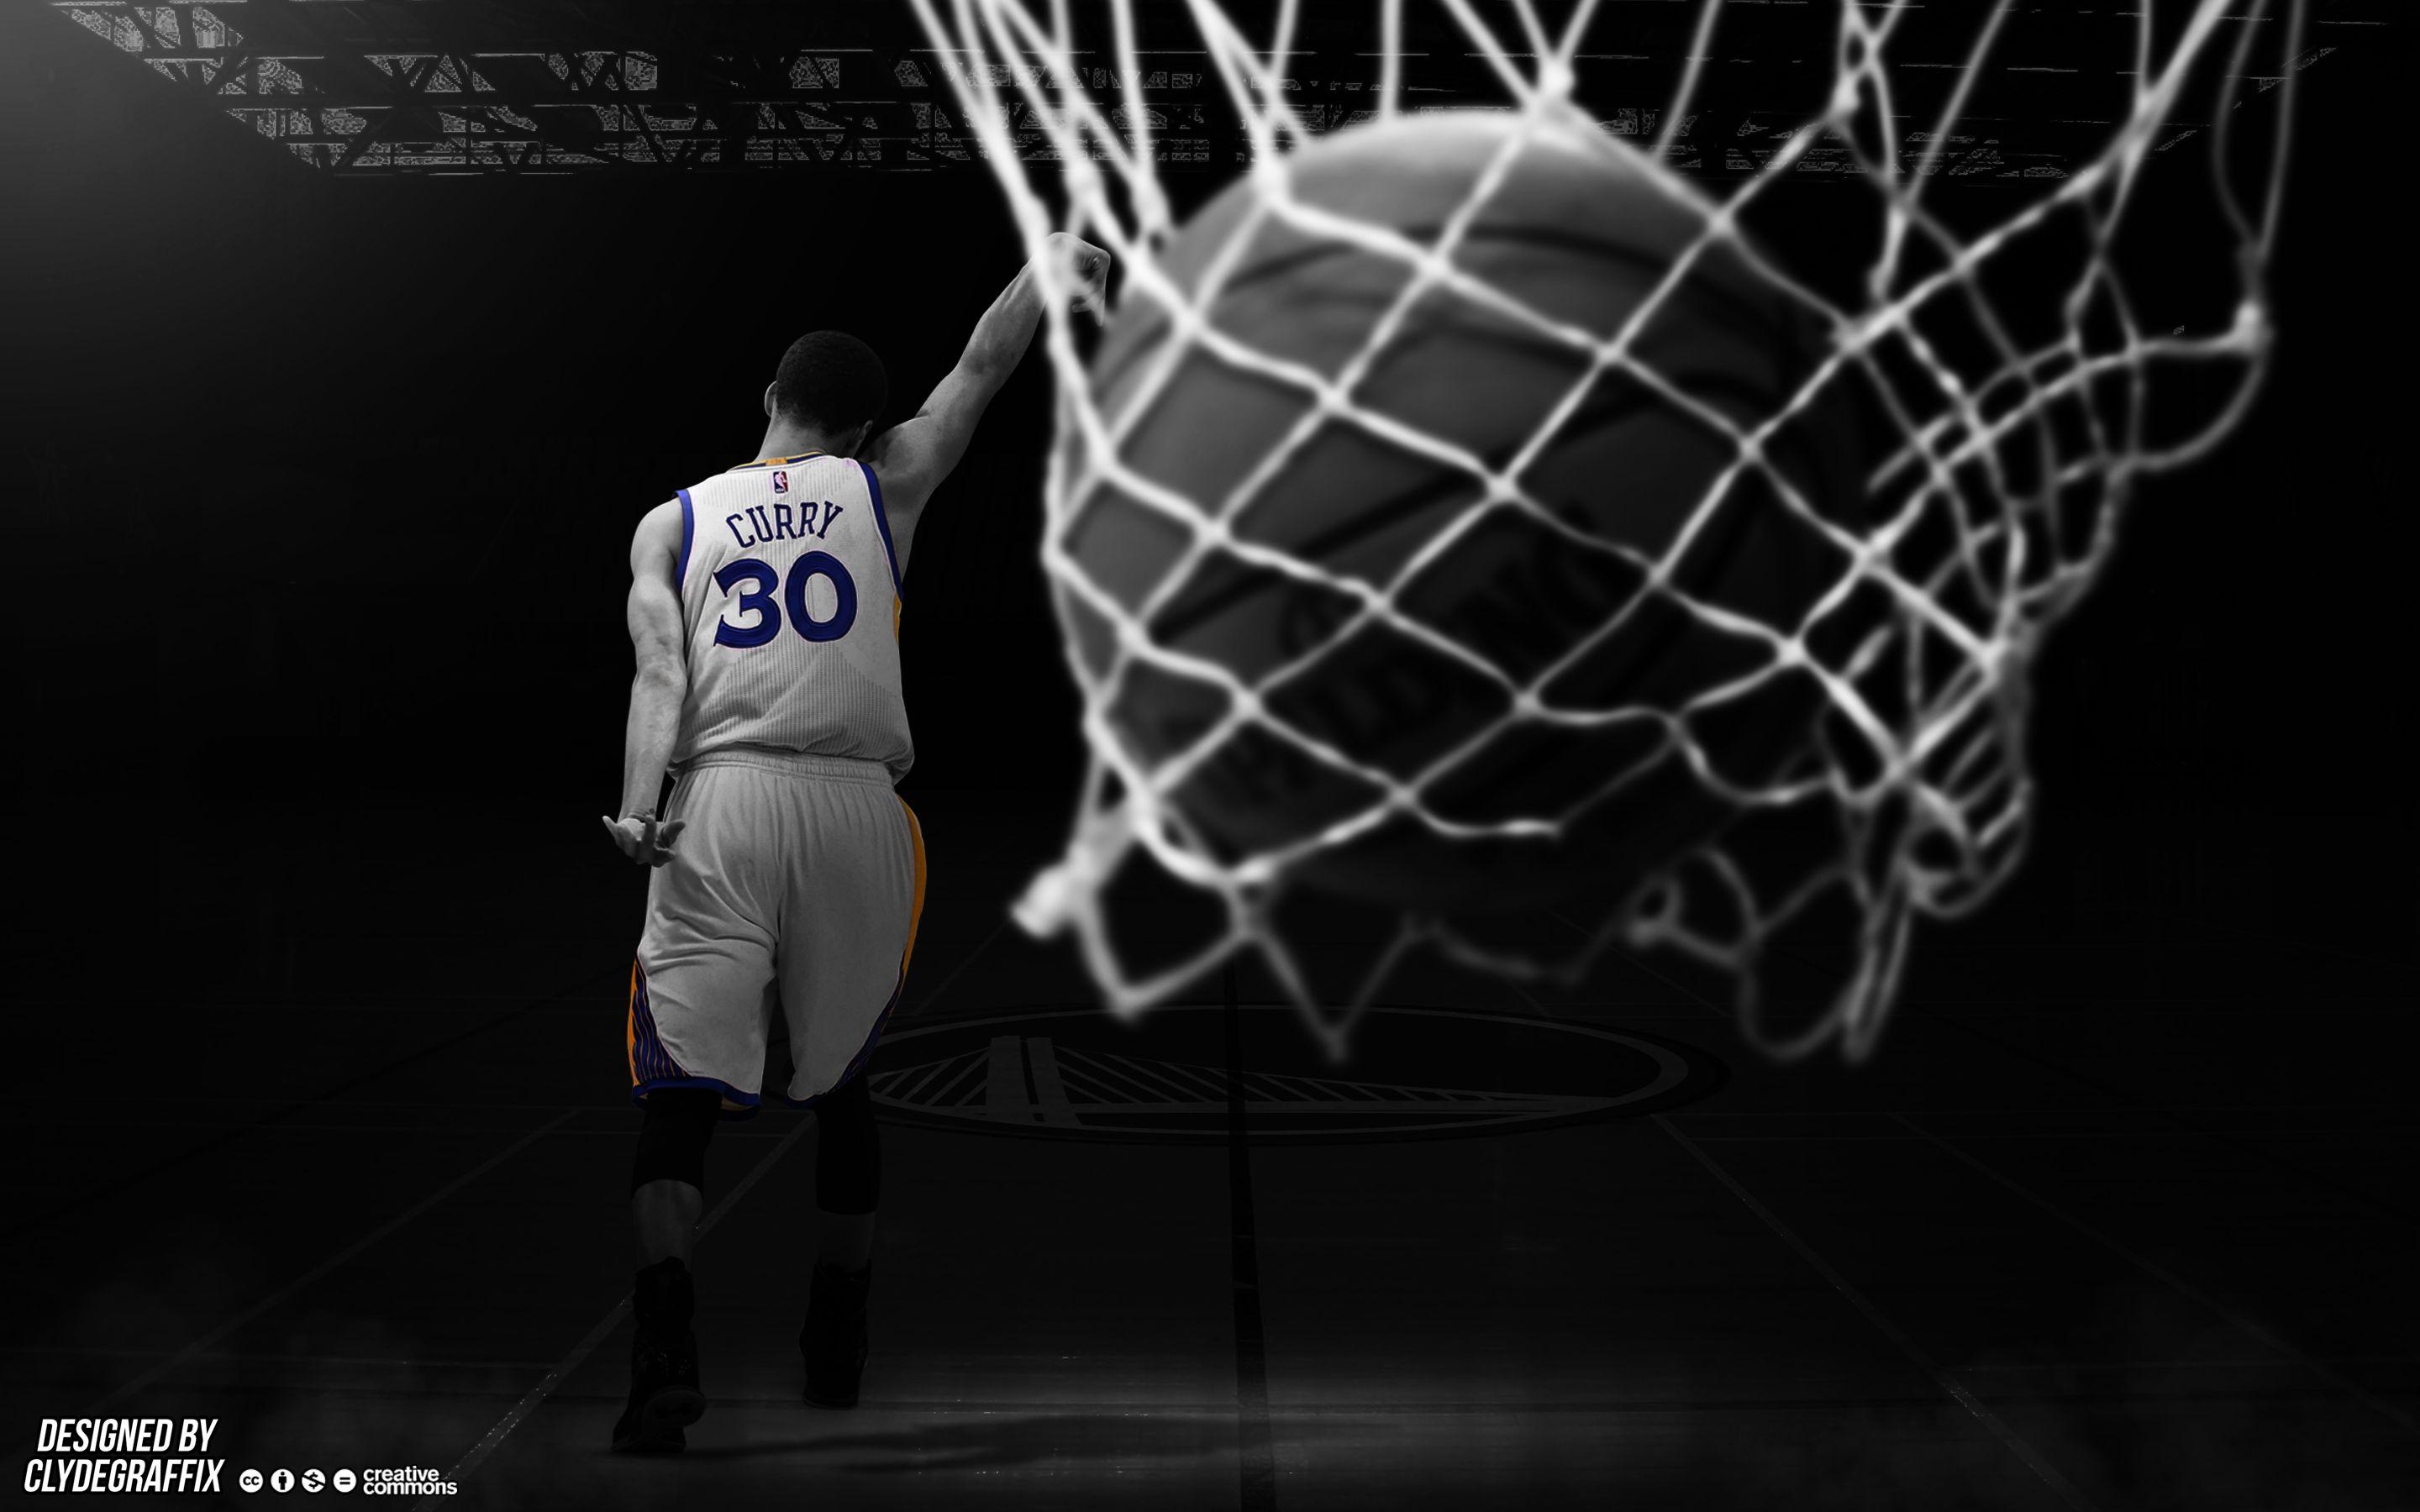 steph curry 3 hand wallpaper